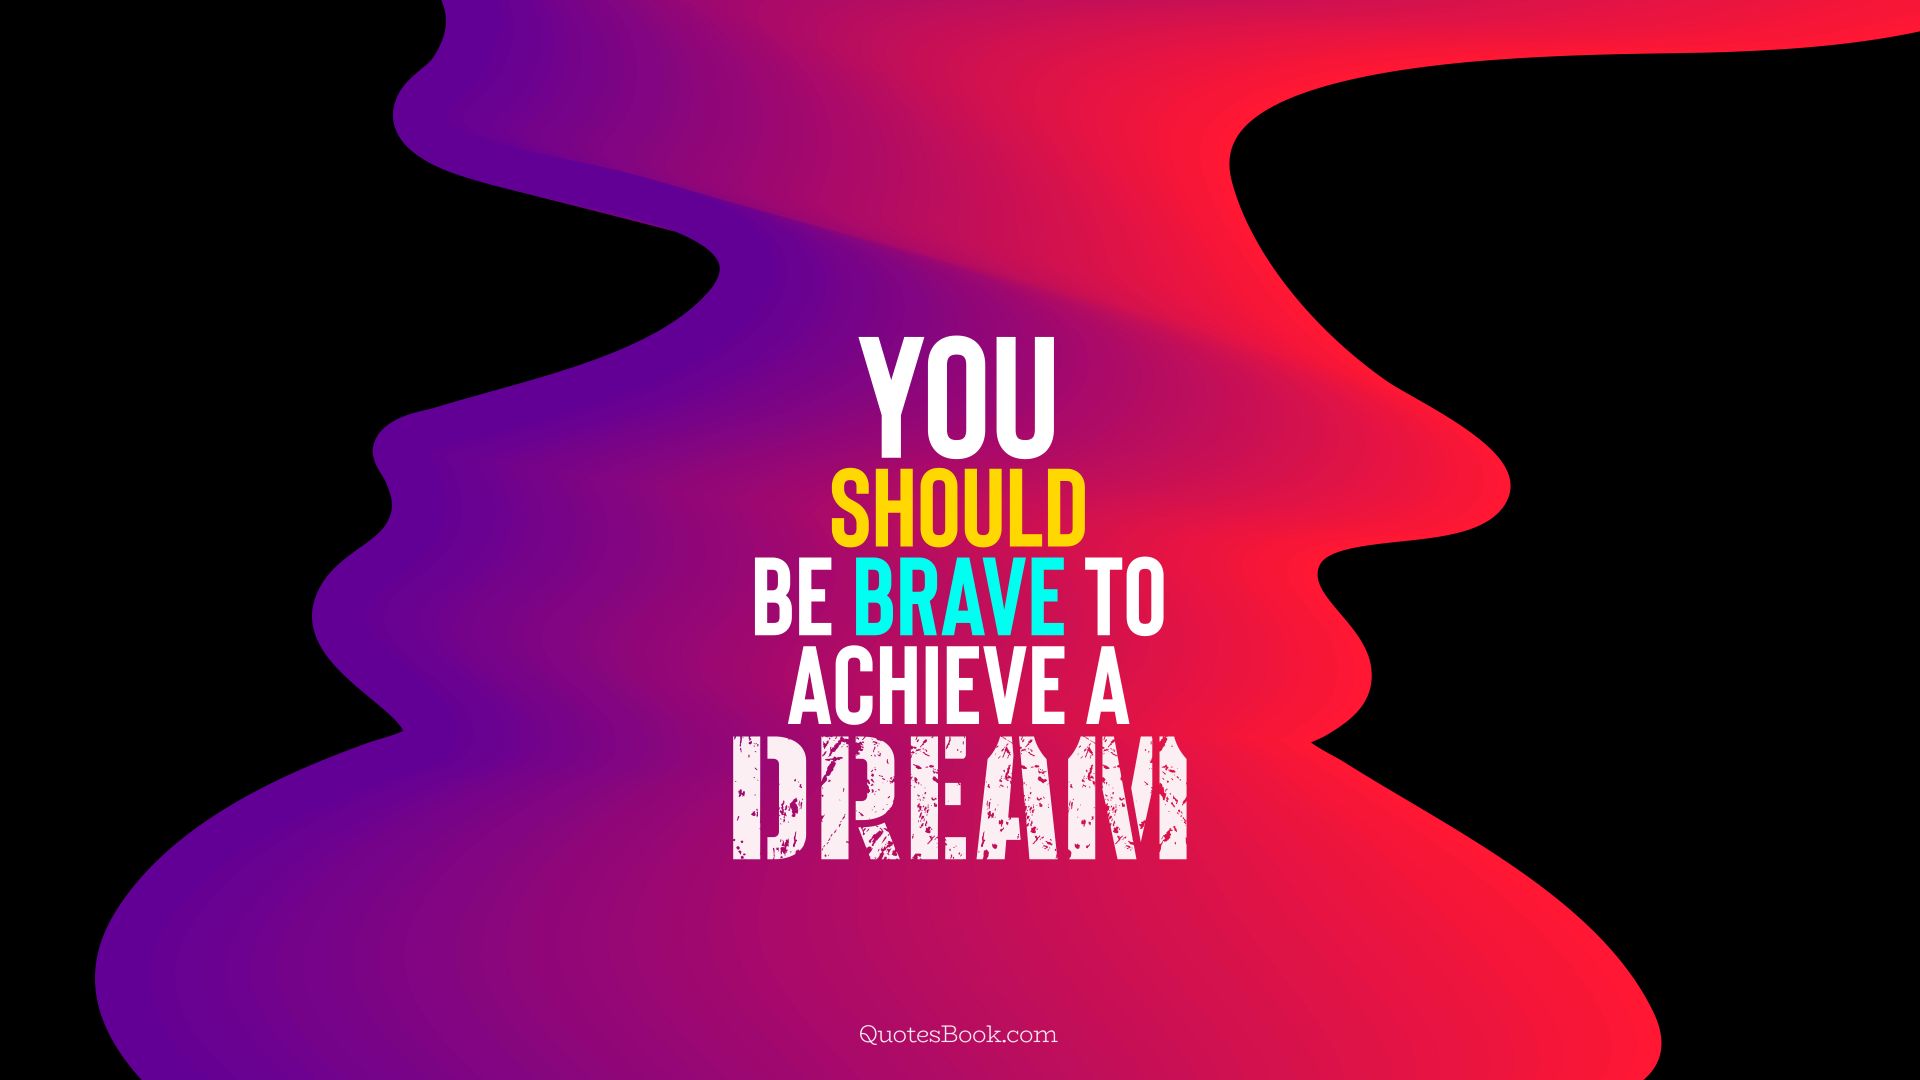 You should be brave to achieve a dream